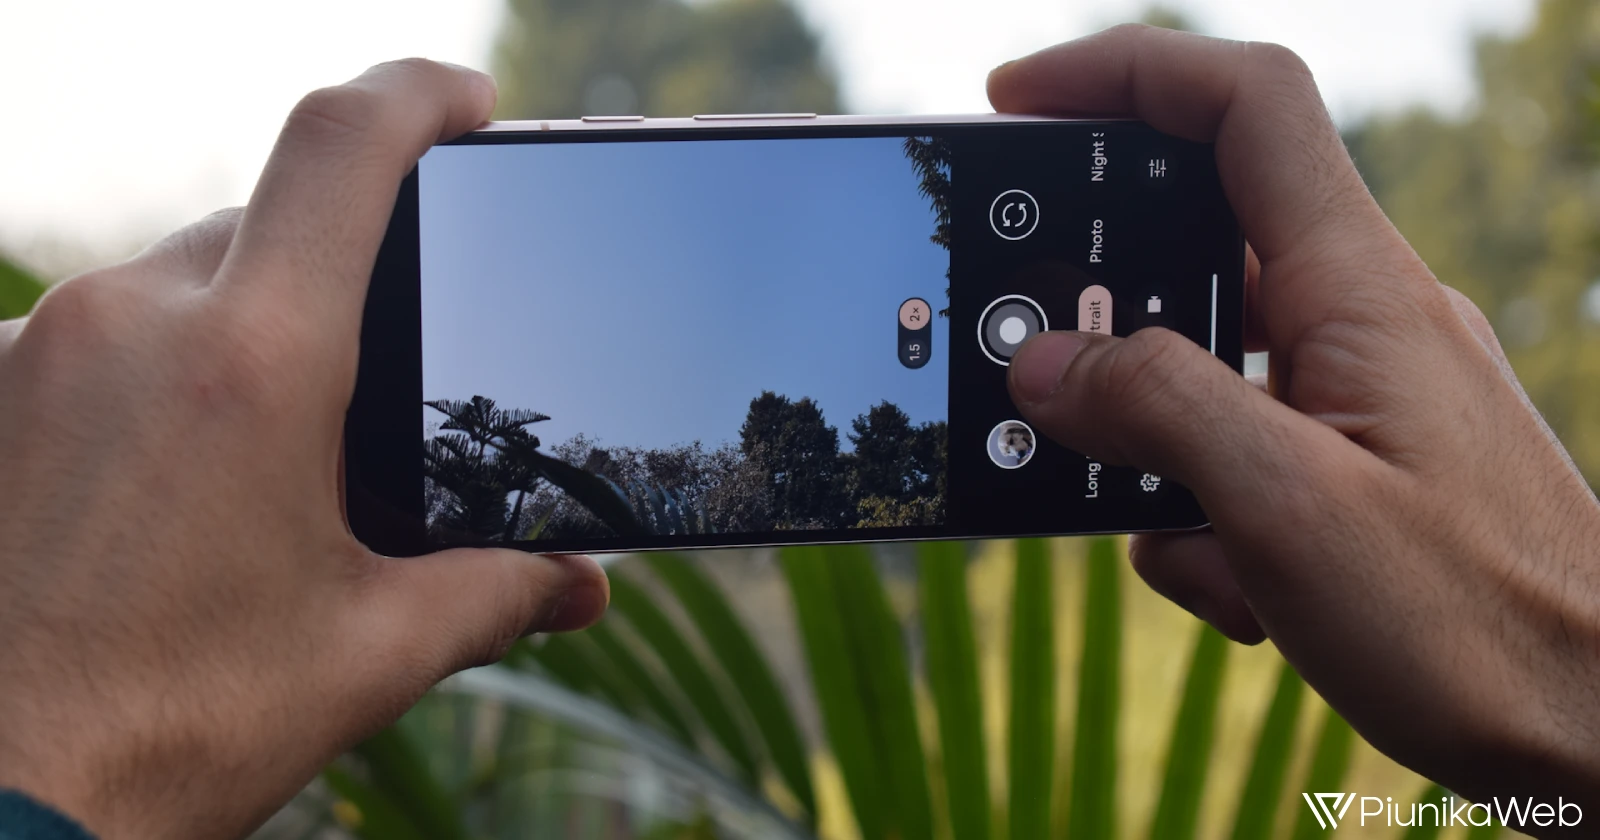 Here's how to stop Camera lens from automatically switching on your Google Pixel phone